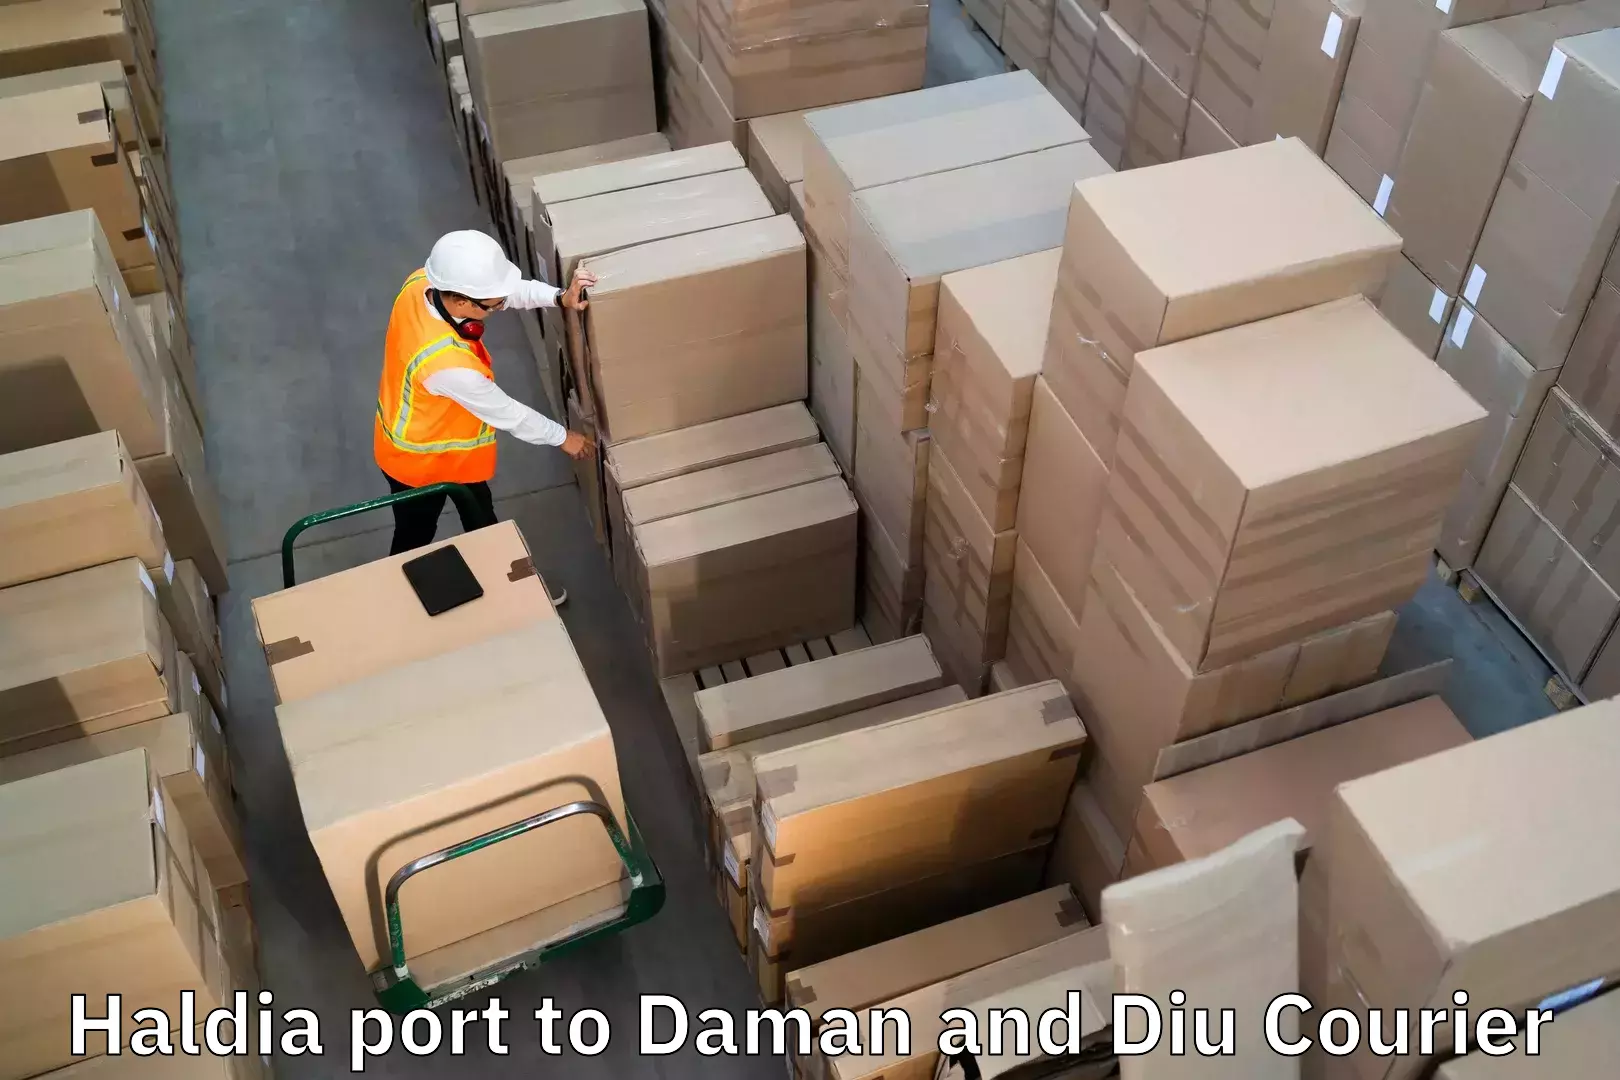 Long distance luggage transport in Haldia port to Daman and Diu